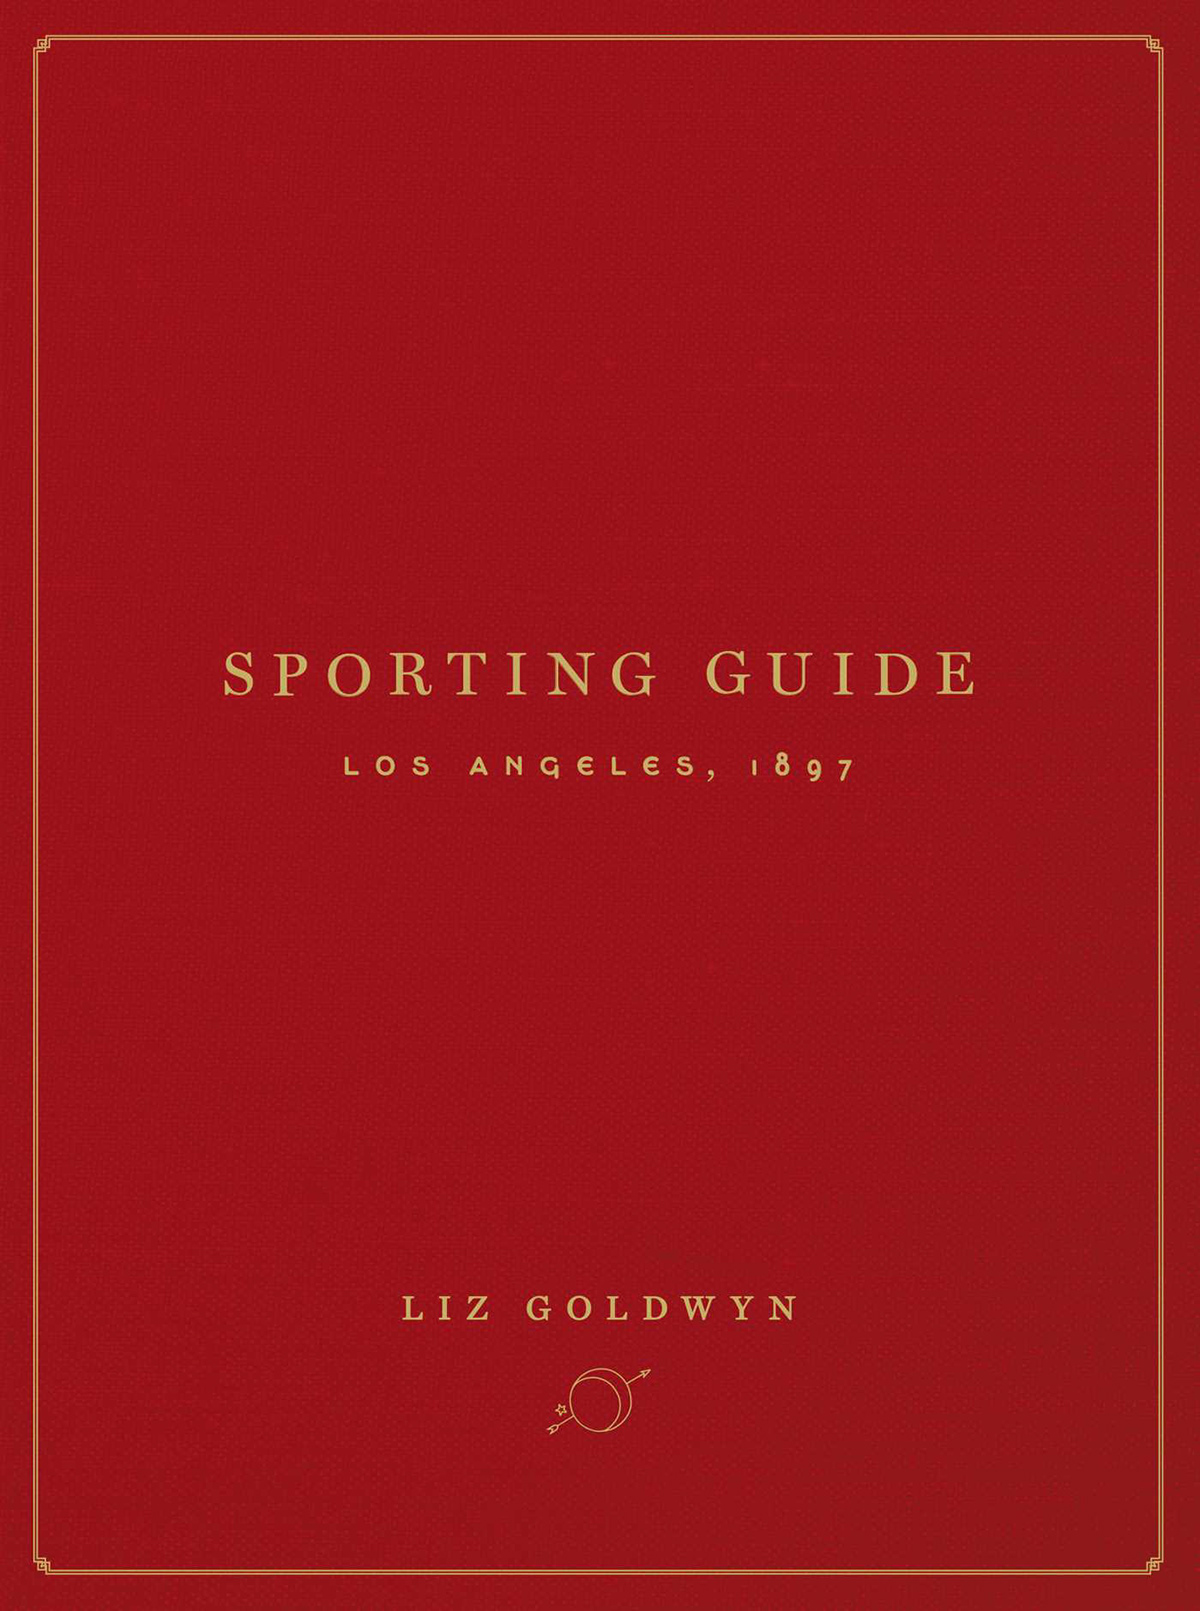 book Cultural History Fire Maps Historic Fiction liz goldwyn Los Angeles prostitution research